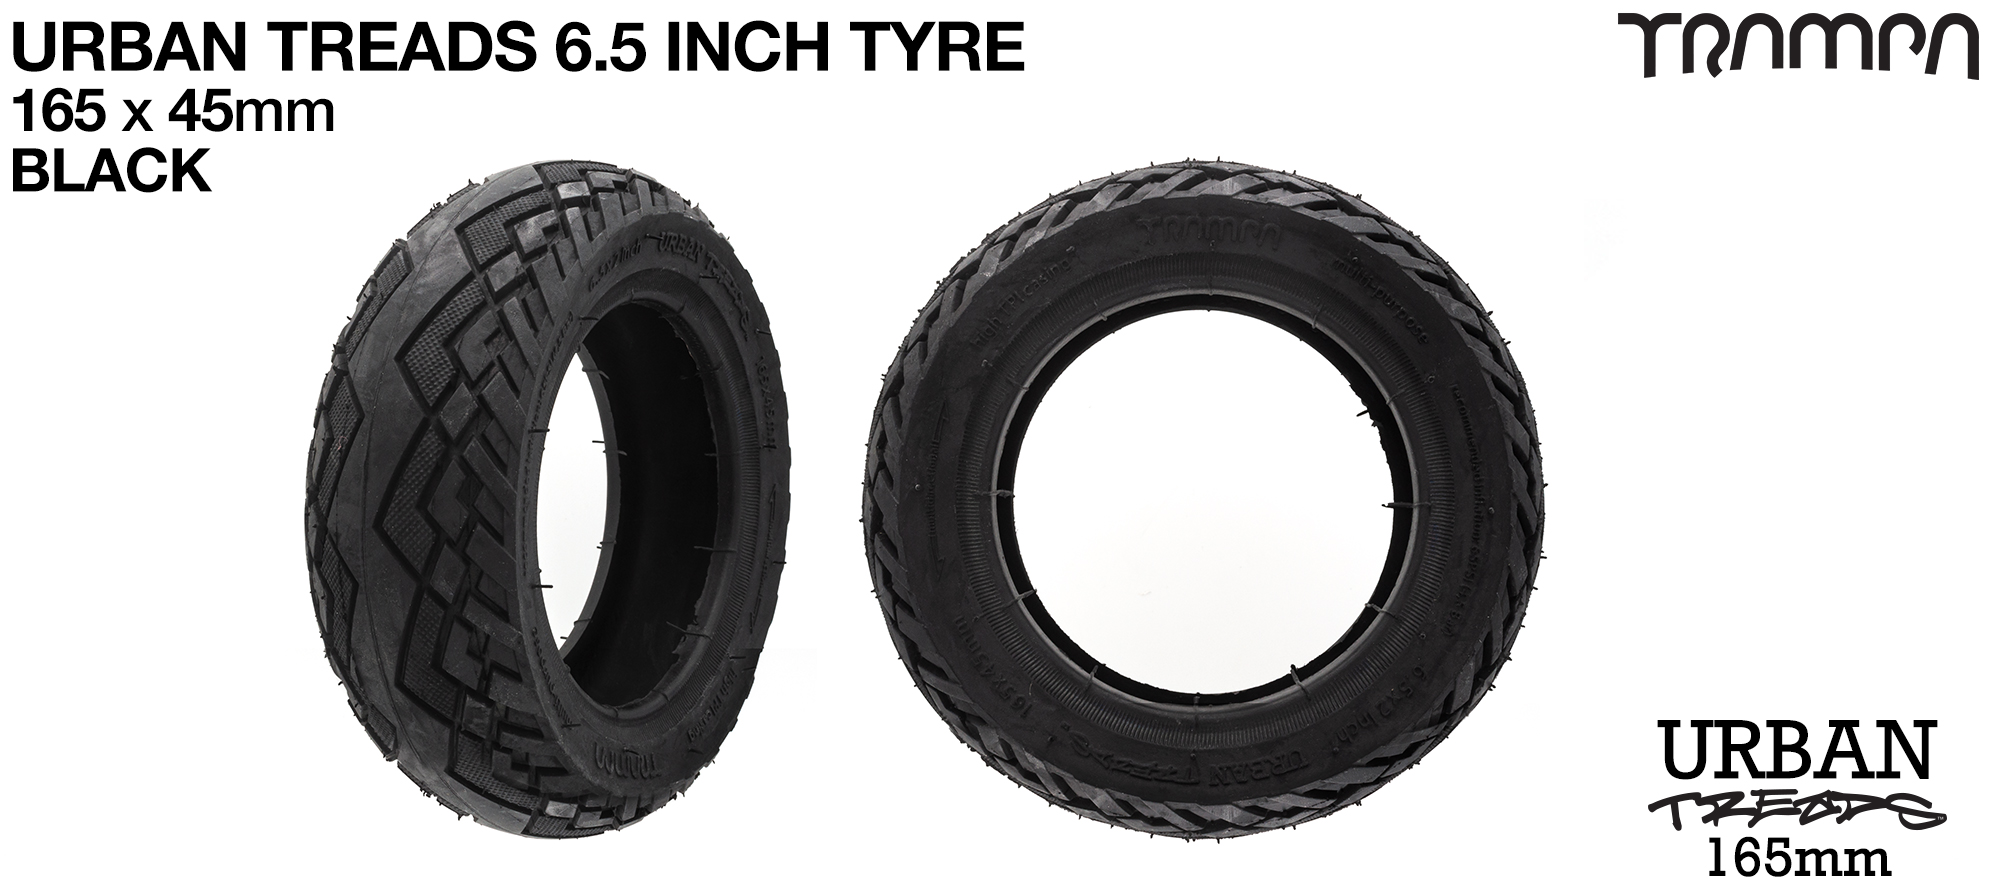 6 Inch Tyre TRAMPA URBAN TREADS is the perfect all round tyre for Urban & City riding - BLACK